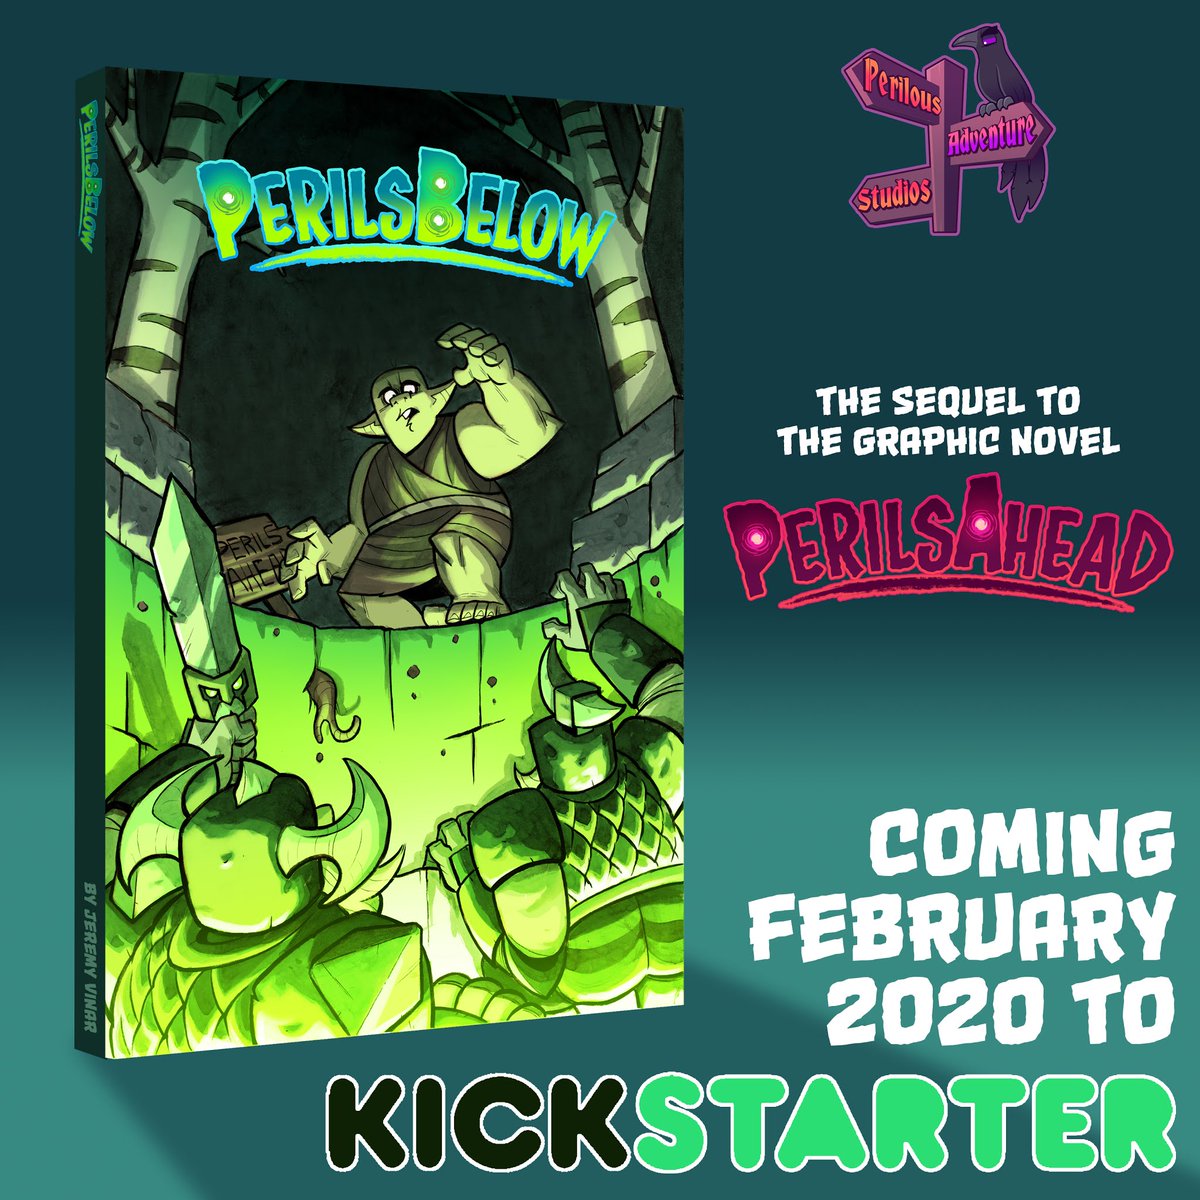 The sequel is coming! If you haven't read the original, now is the time! We still have copies for sale on our website: perilousadventurestudios.com #graphicnovel #comic #comicbooks #fantasy #fantasyart #selfpublished #kidsbooks #indiebooks #graphicnovelsforkids #kickstarter